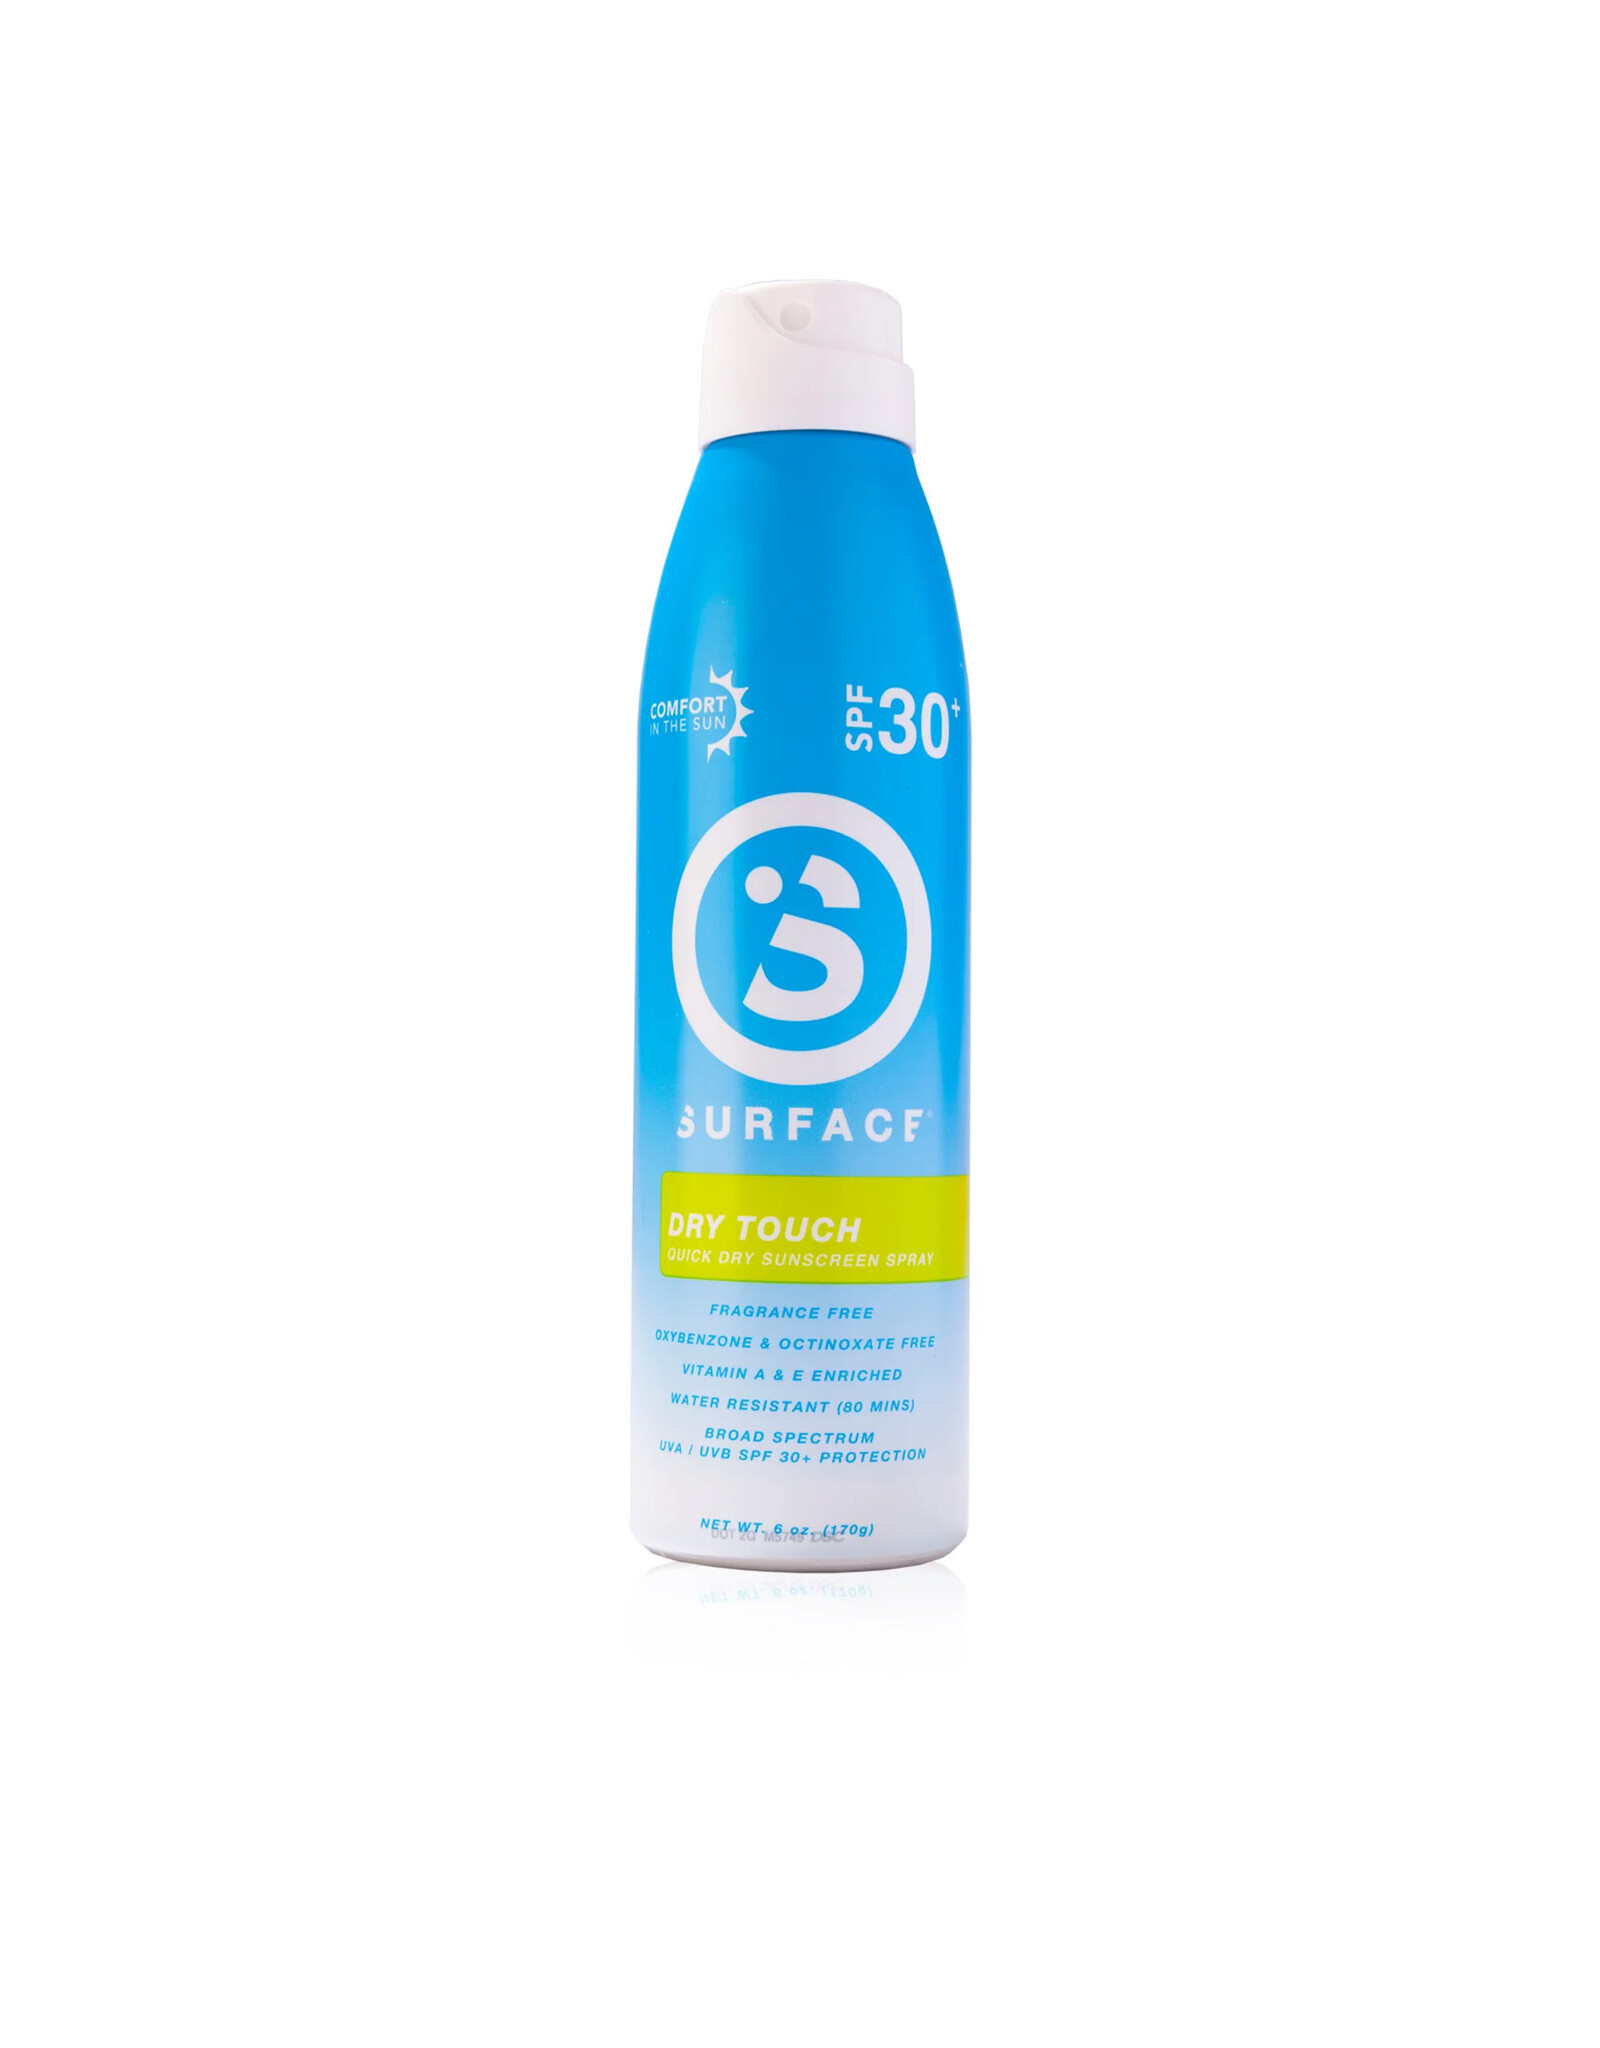 Surface Sunscreen Dry Touch Spray Fragrance Free SPF30 6oz